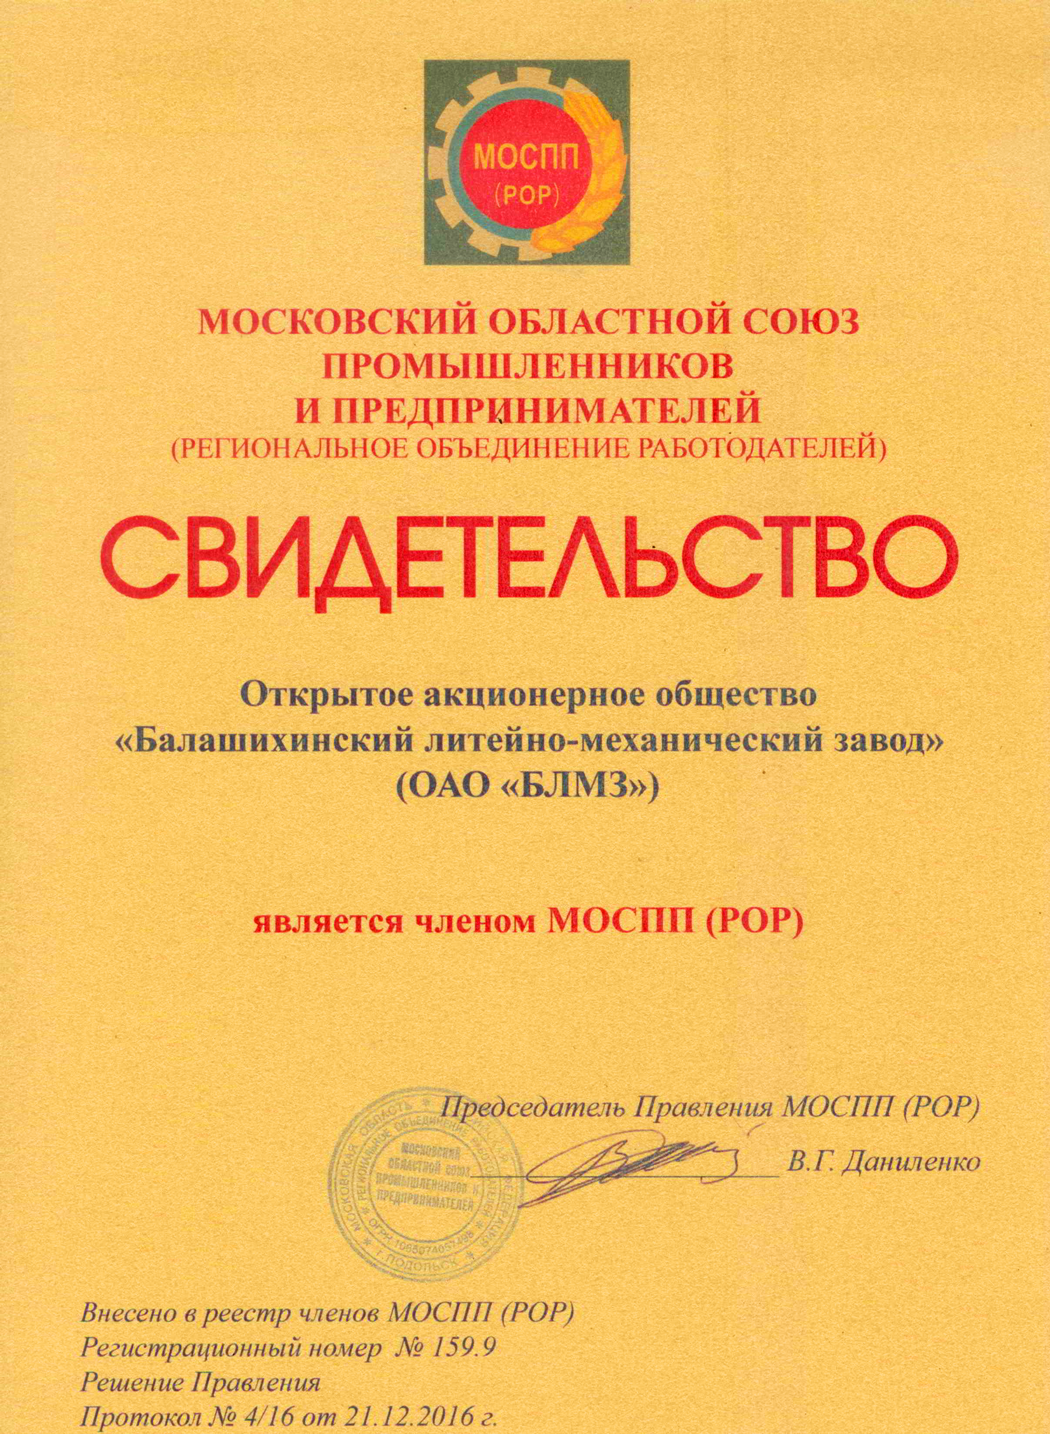 Certificate of membership of JSC BLMZ in the Moscow regional Union of Industrialists and entrepreneurs (regional Association of employers